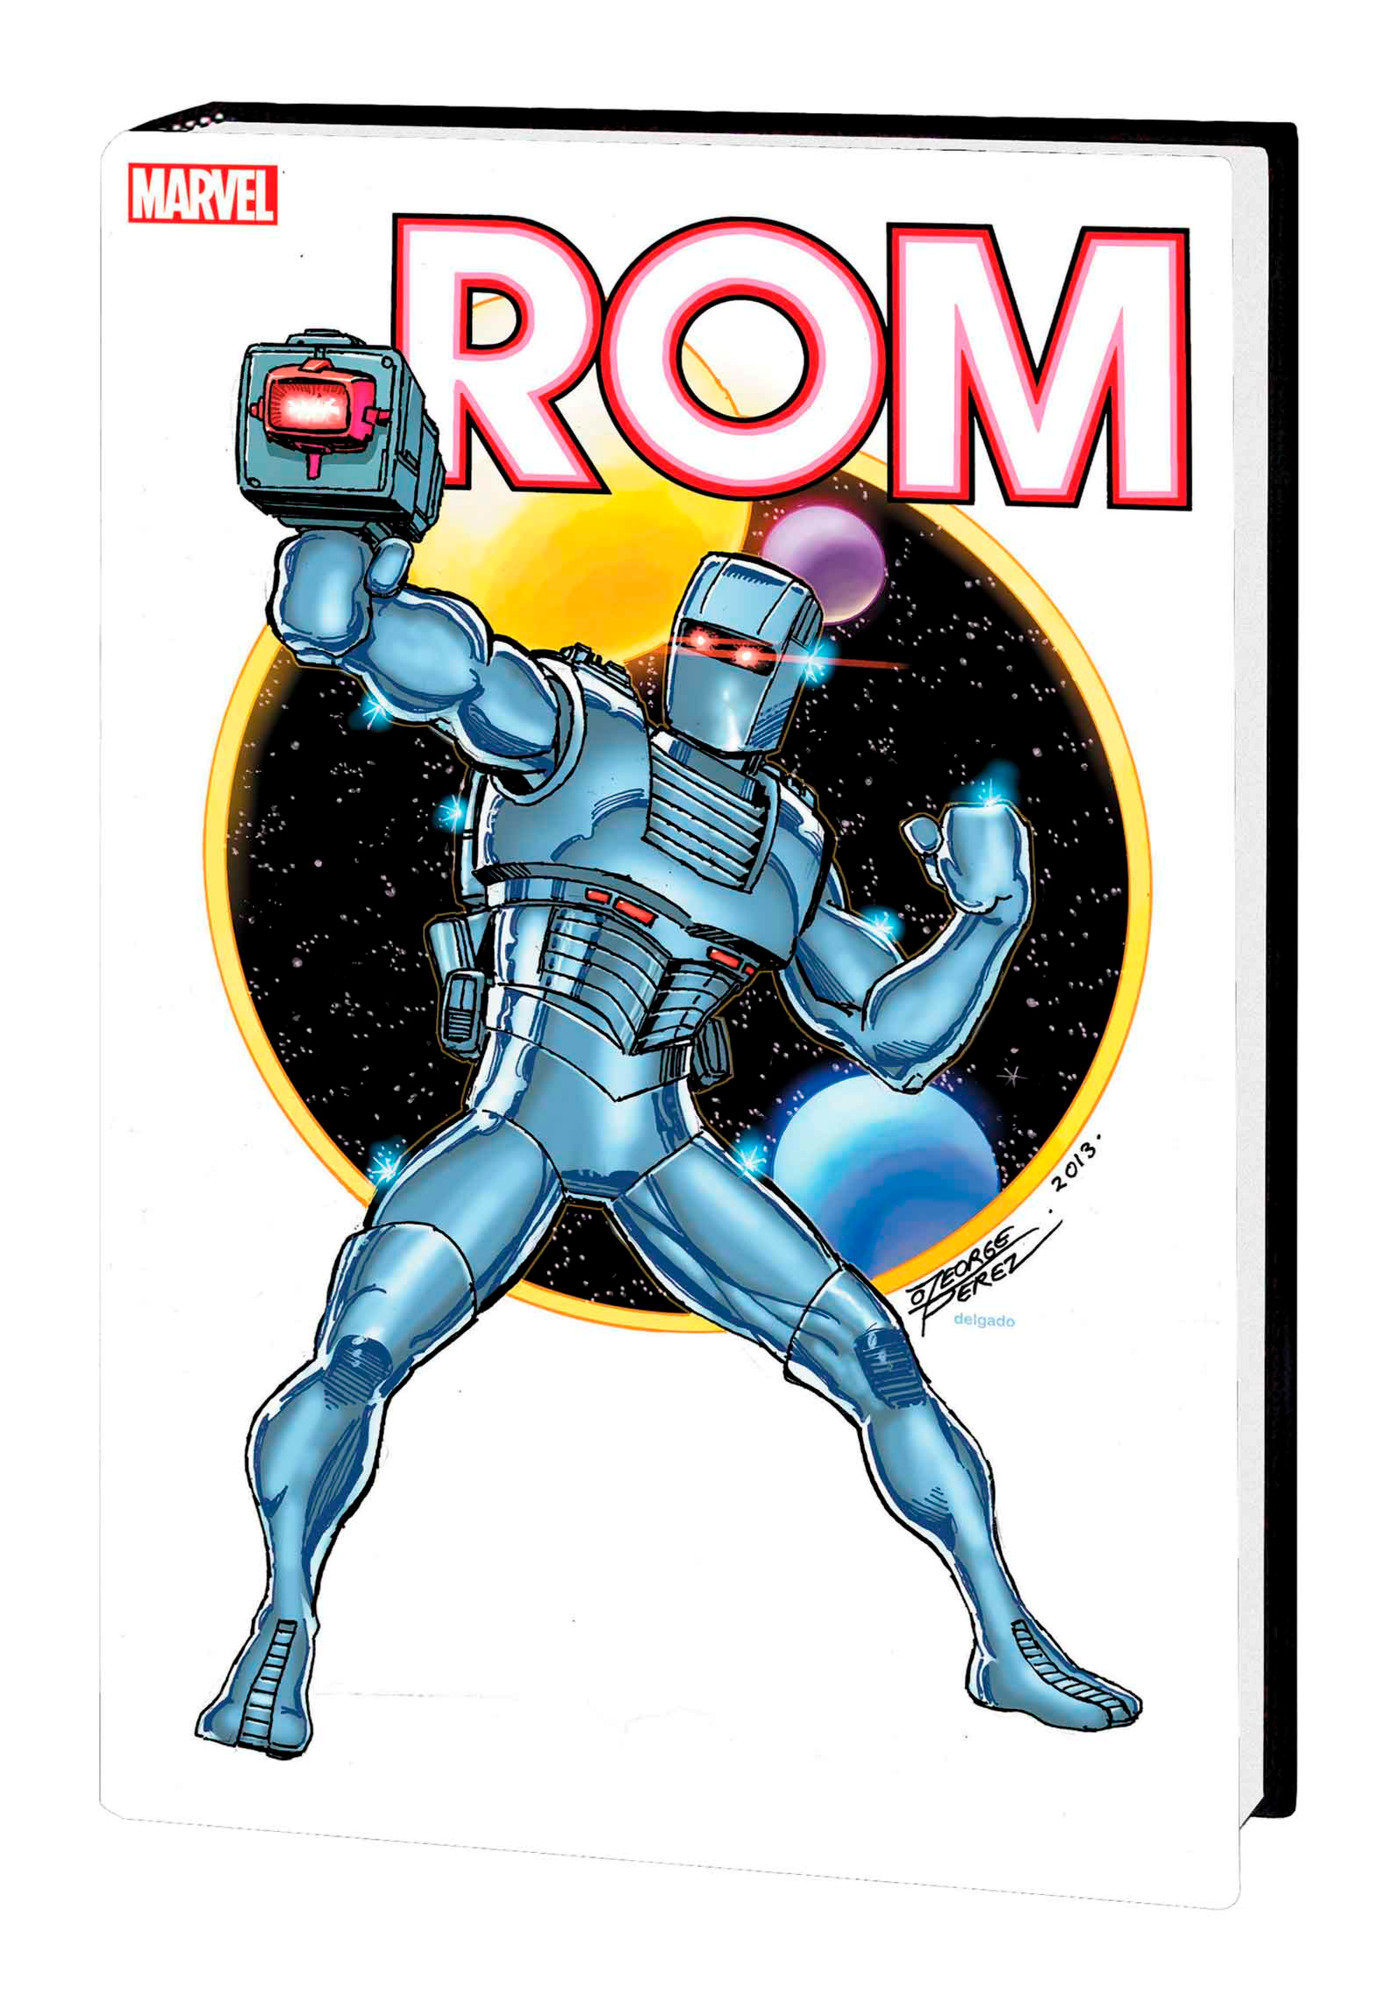 Rom: The Original Marvel Years Omnibus Hardcover Graphic Novel Volume 1 George Perez Cover [Direct Market Edition]